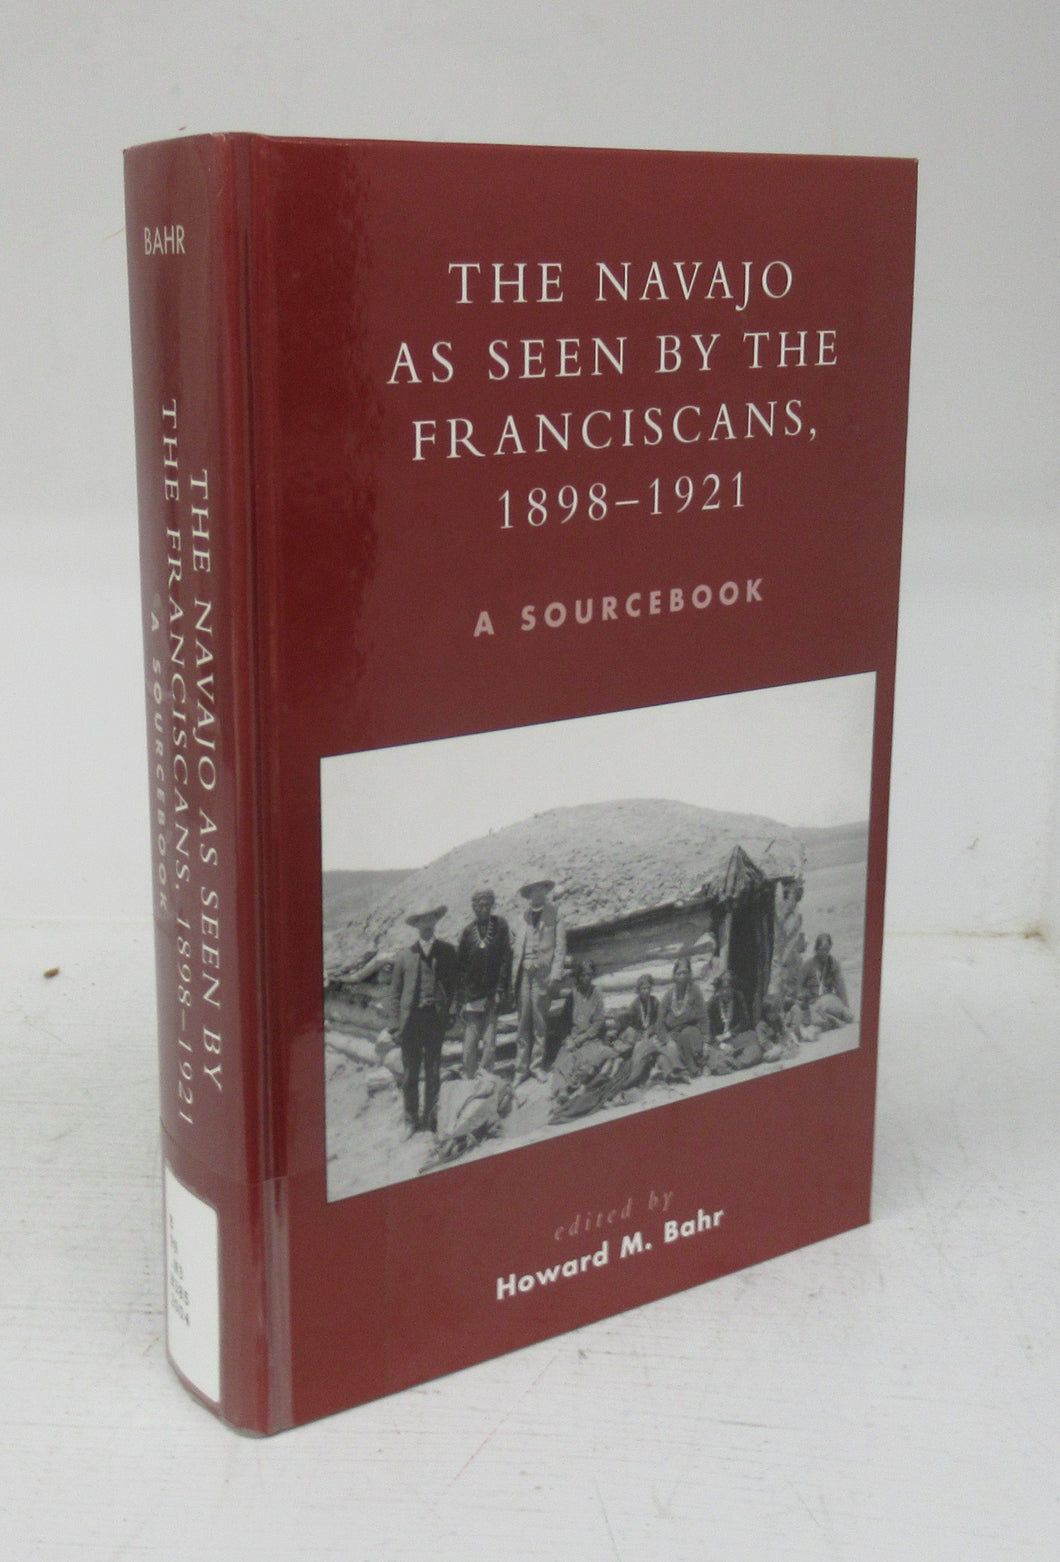 The Navajo As Seen by the Franciscans, 1898-1921: A Sourcebook